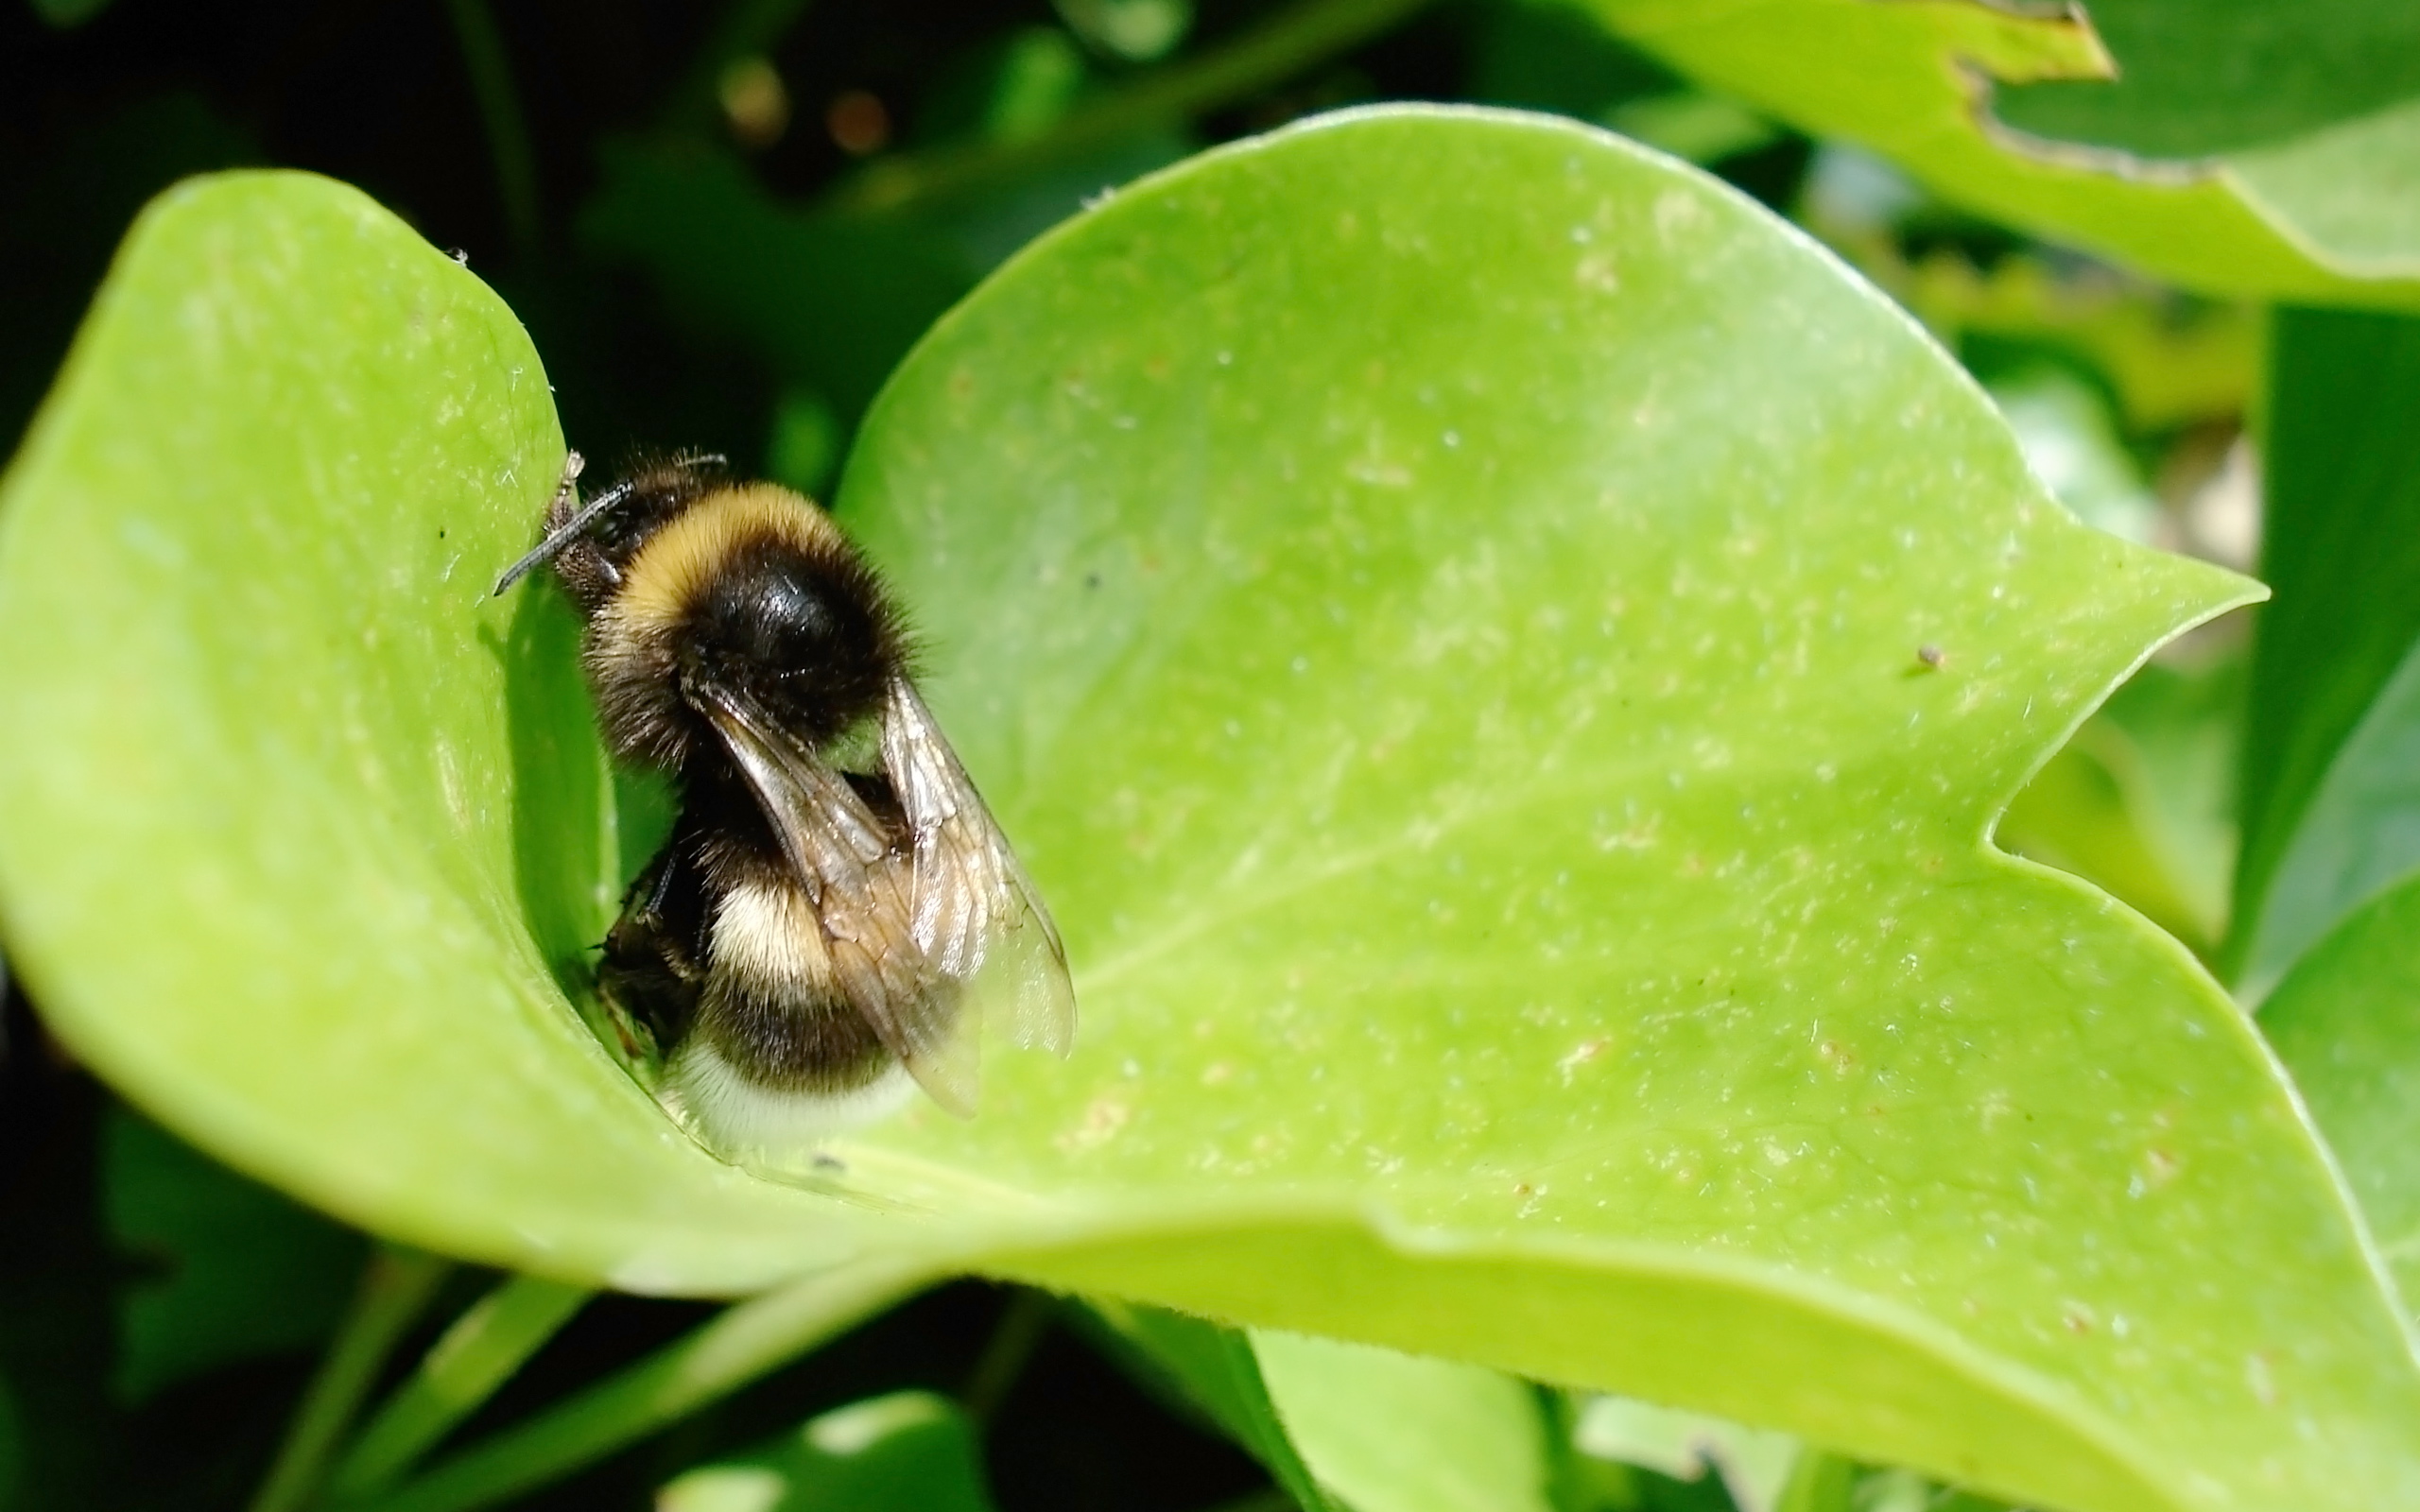 Resting bumblebee on a leaf, close-up view.